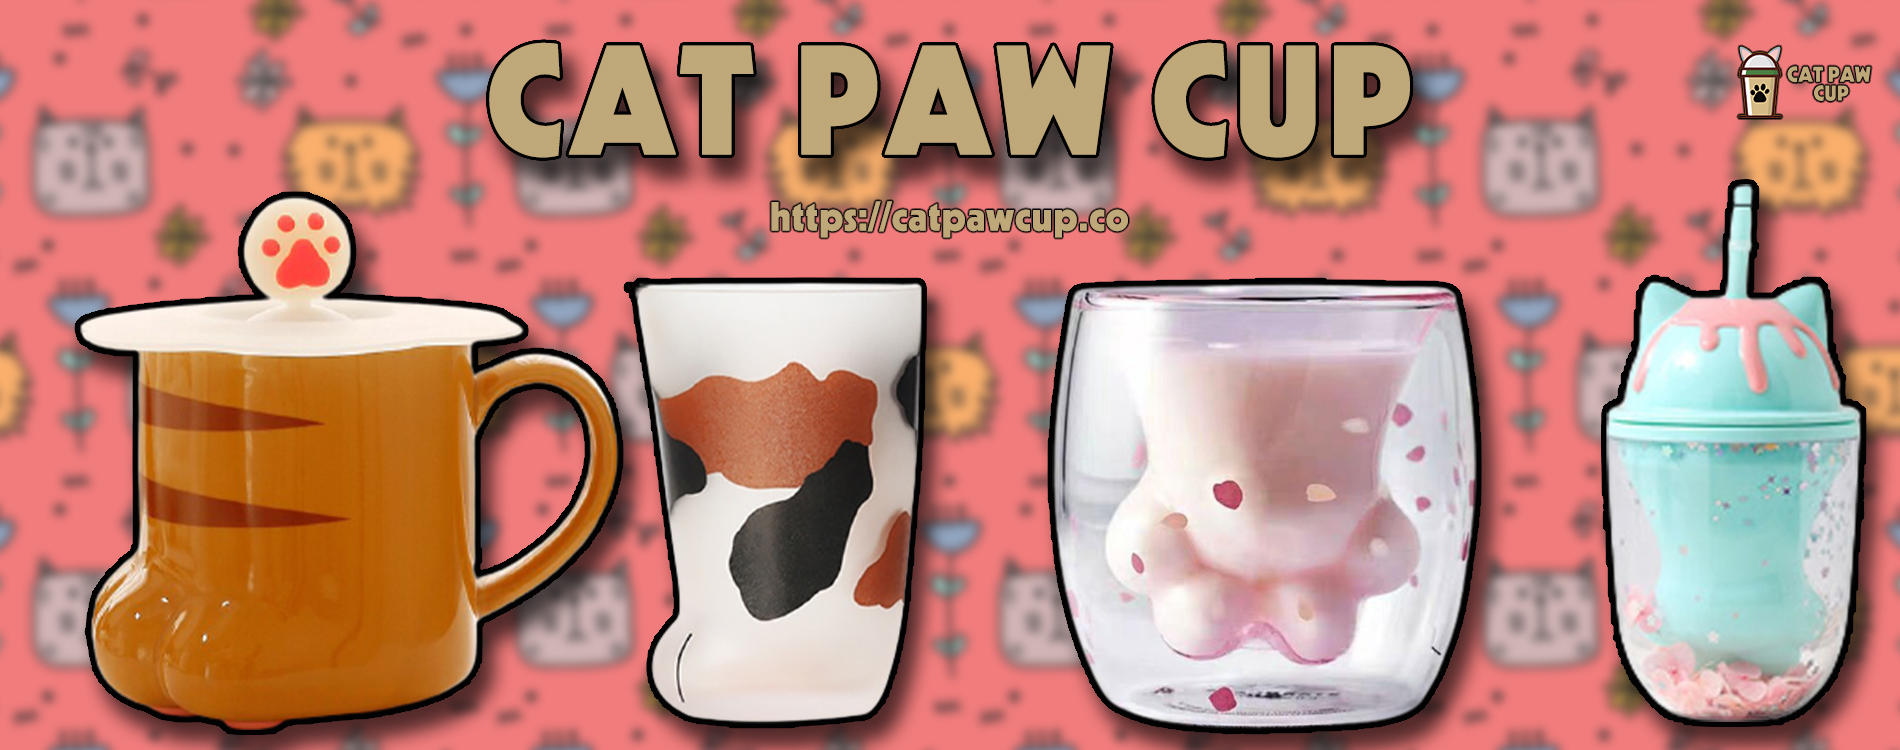 cat paw cup banner - Cat Paw Cup